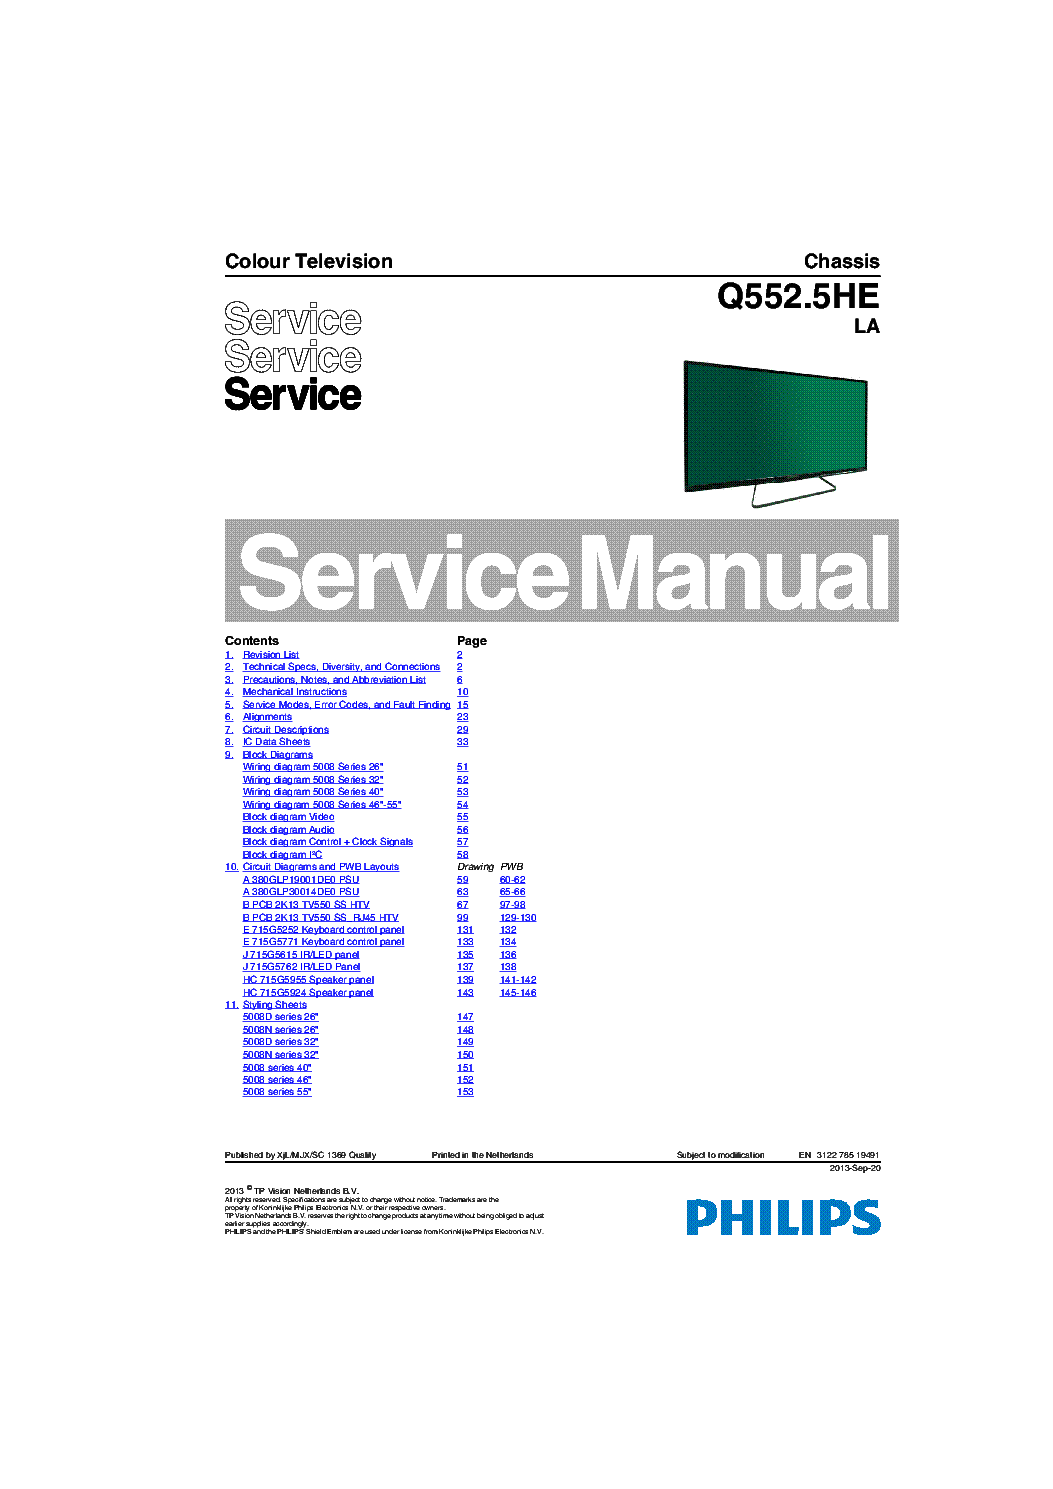 PHILIPS 55HFL5008D 12 CHASSIS Q552.5HE LA service manual (1st page)